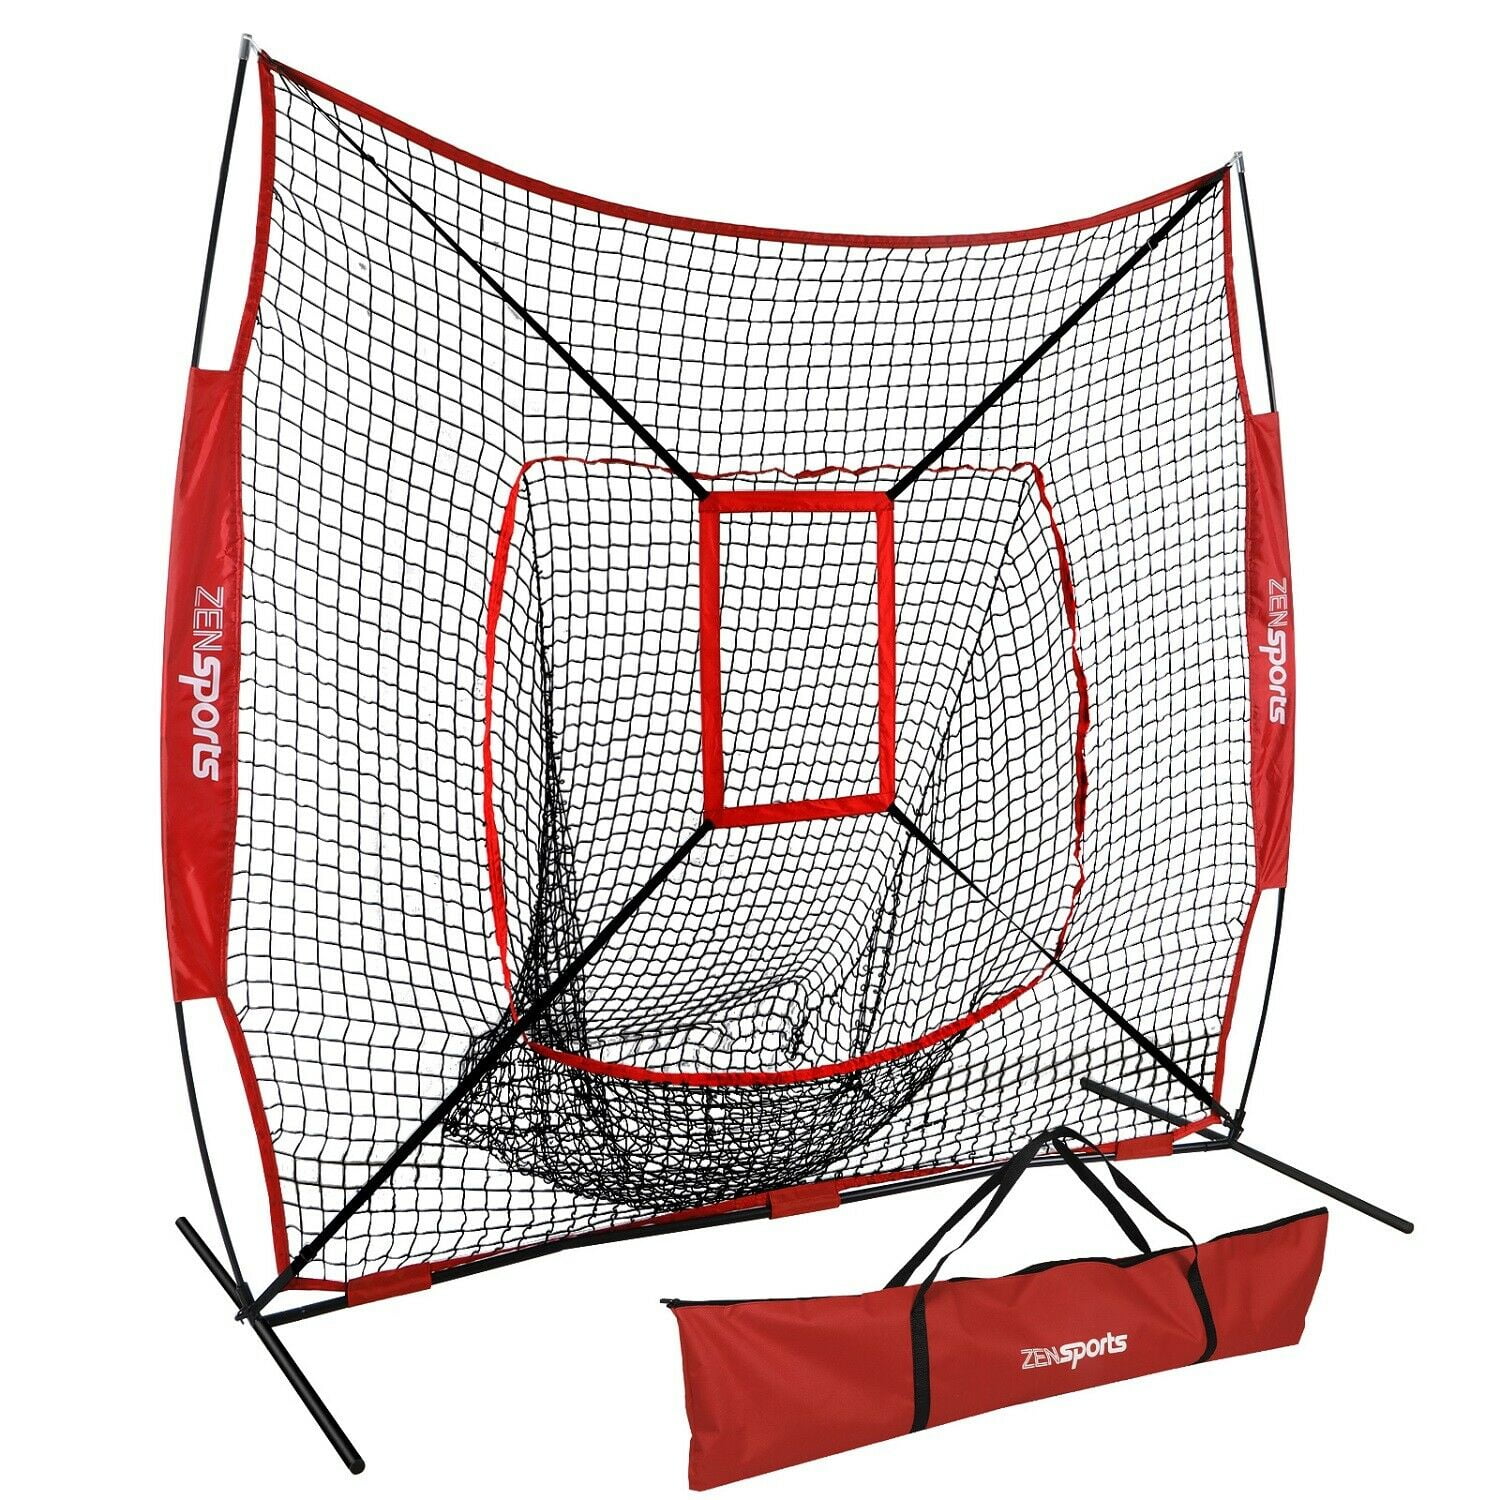 Baseball 7 x 7' Net Practice Hitting Pitching Batting and Catching with Bag 